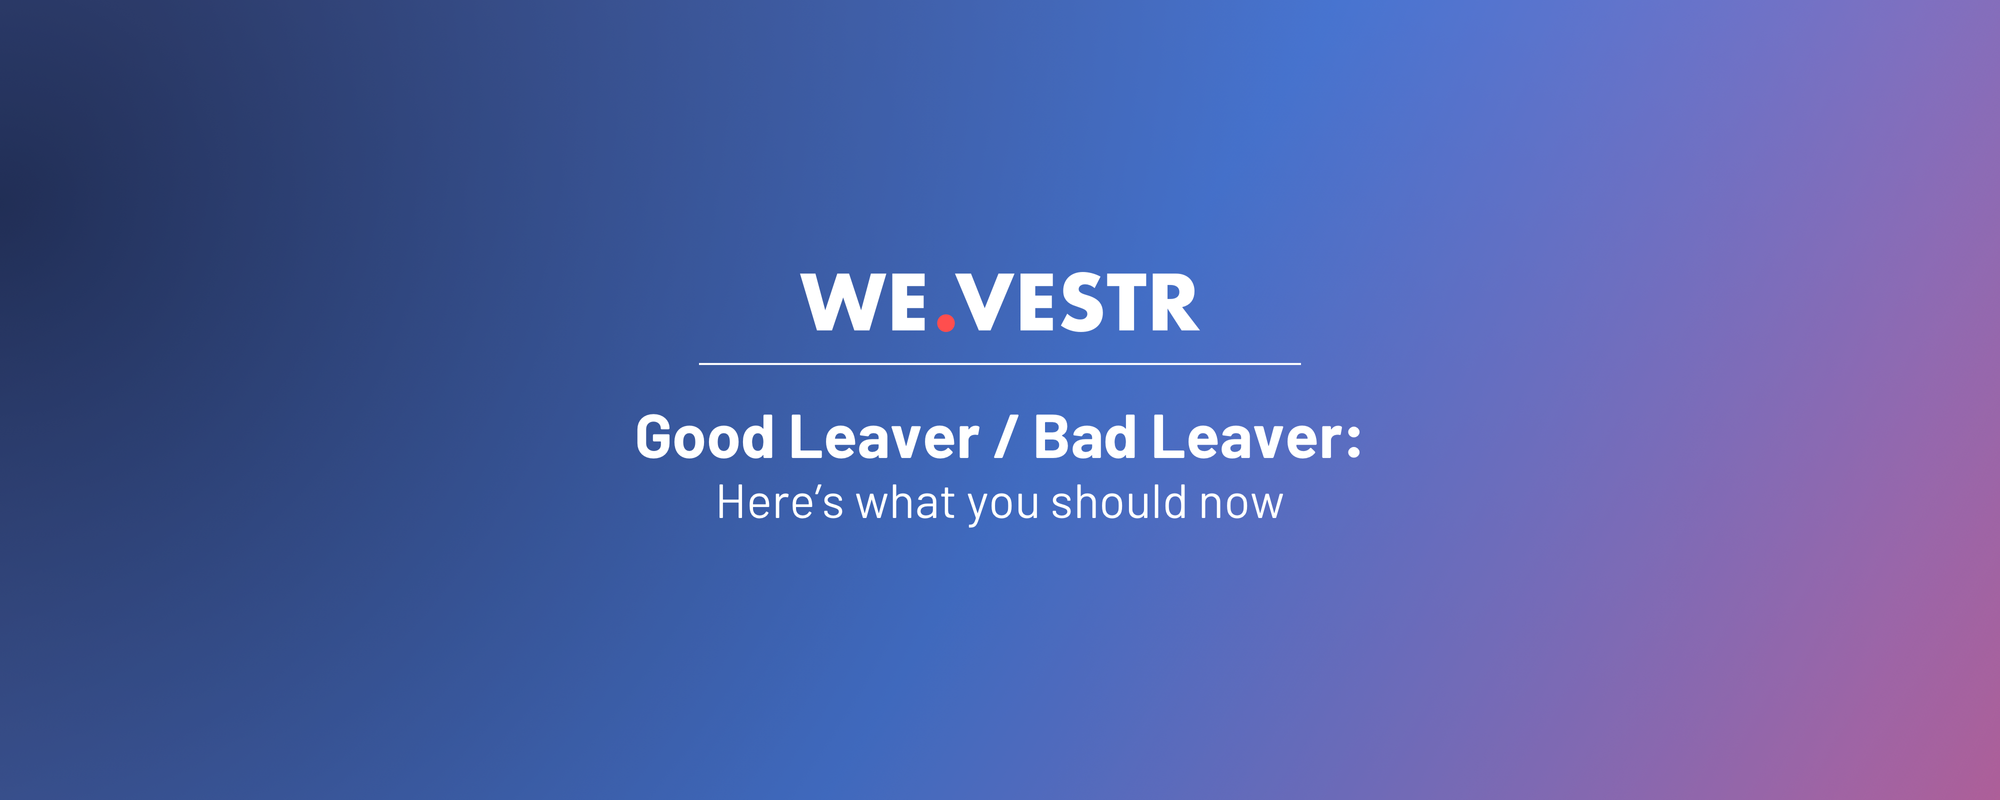 Good Leaver / Bad Leaver: Here's what you should know